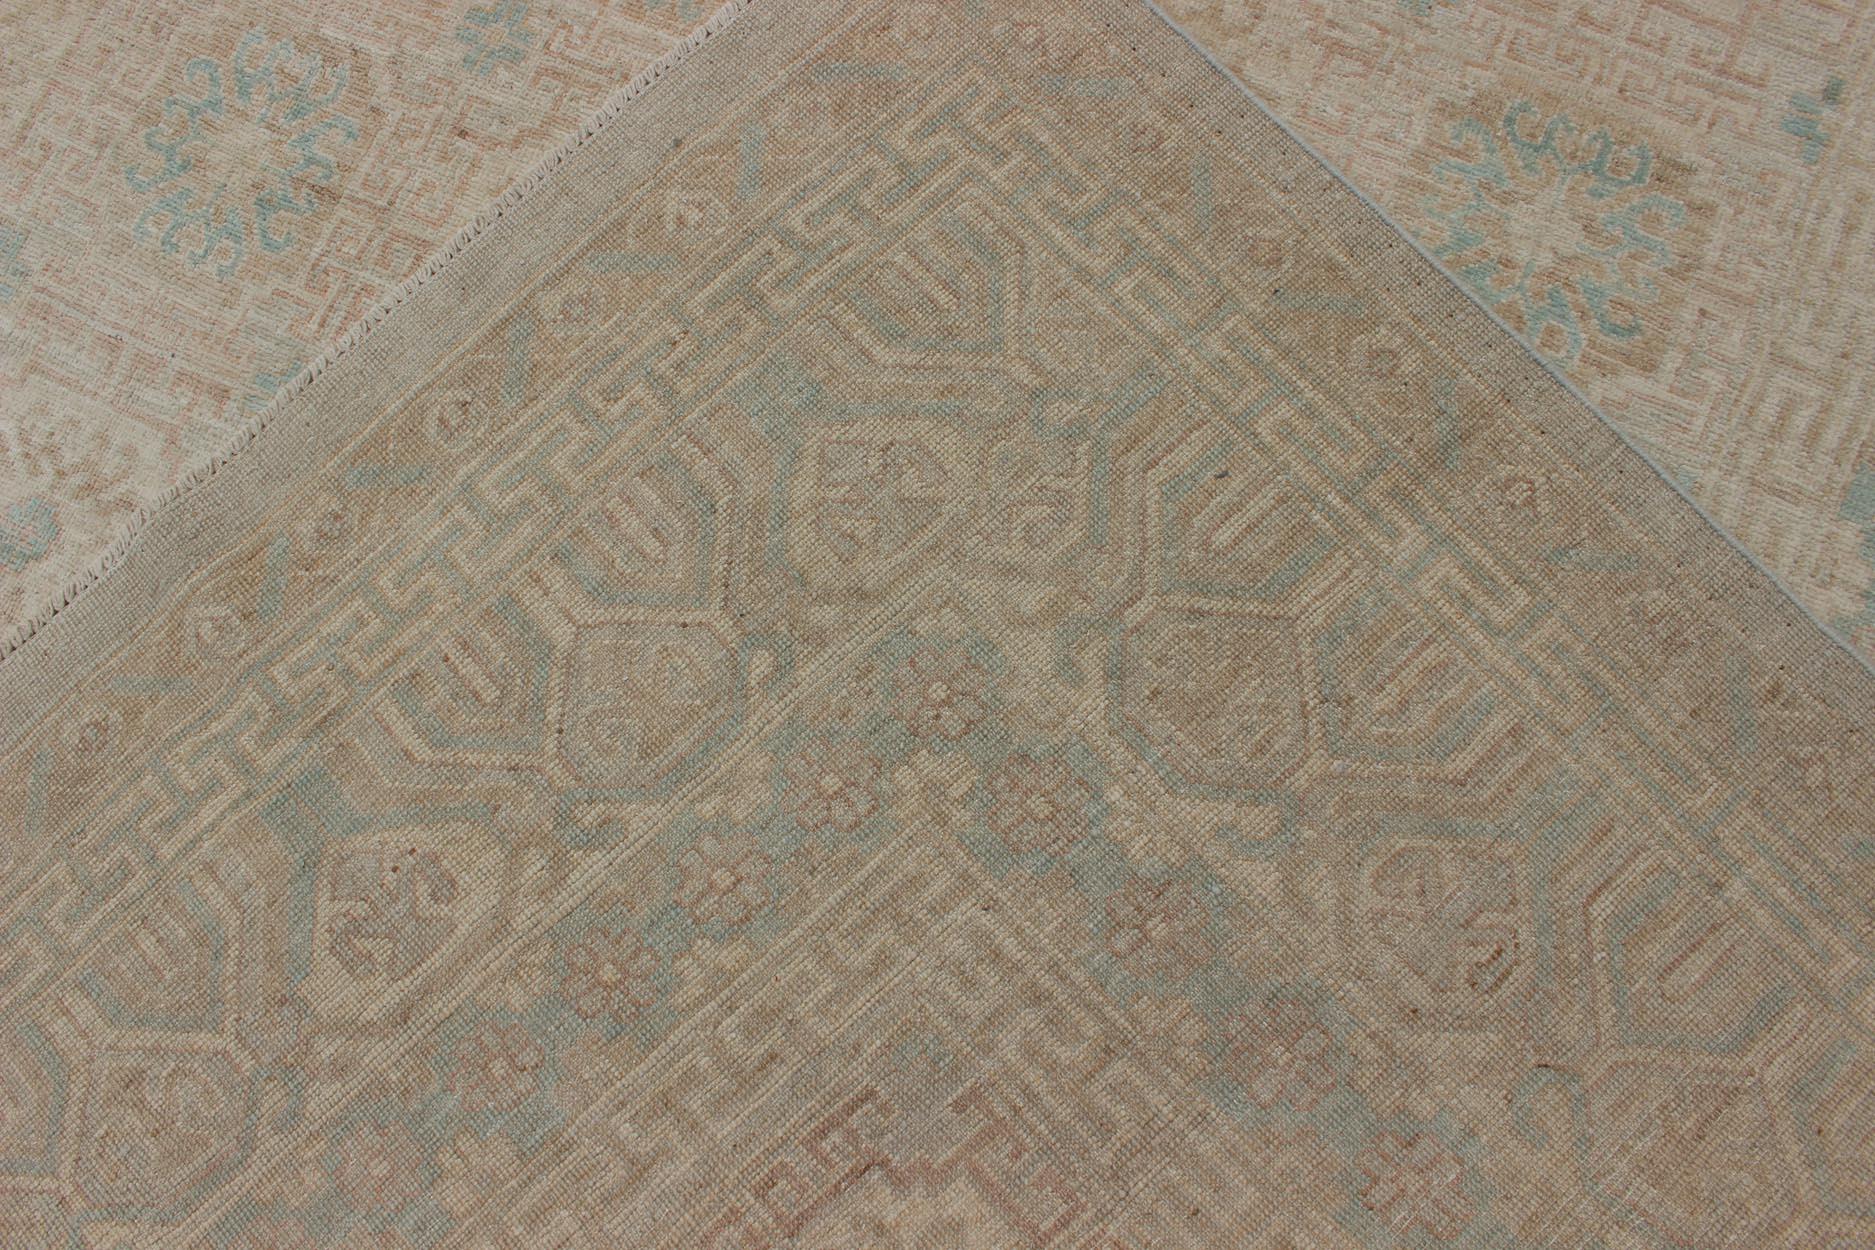 Khotan Design Rug with Geometric Medallions in Tan and Turquoise For Sale 5